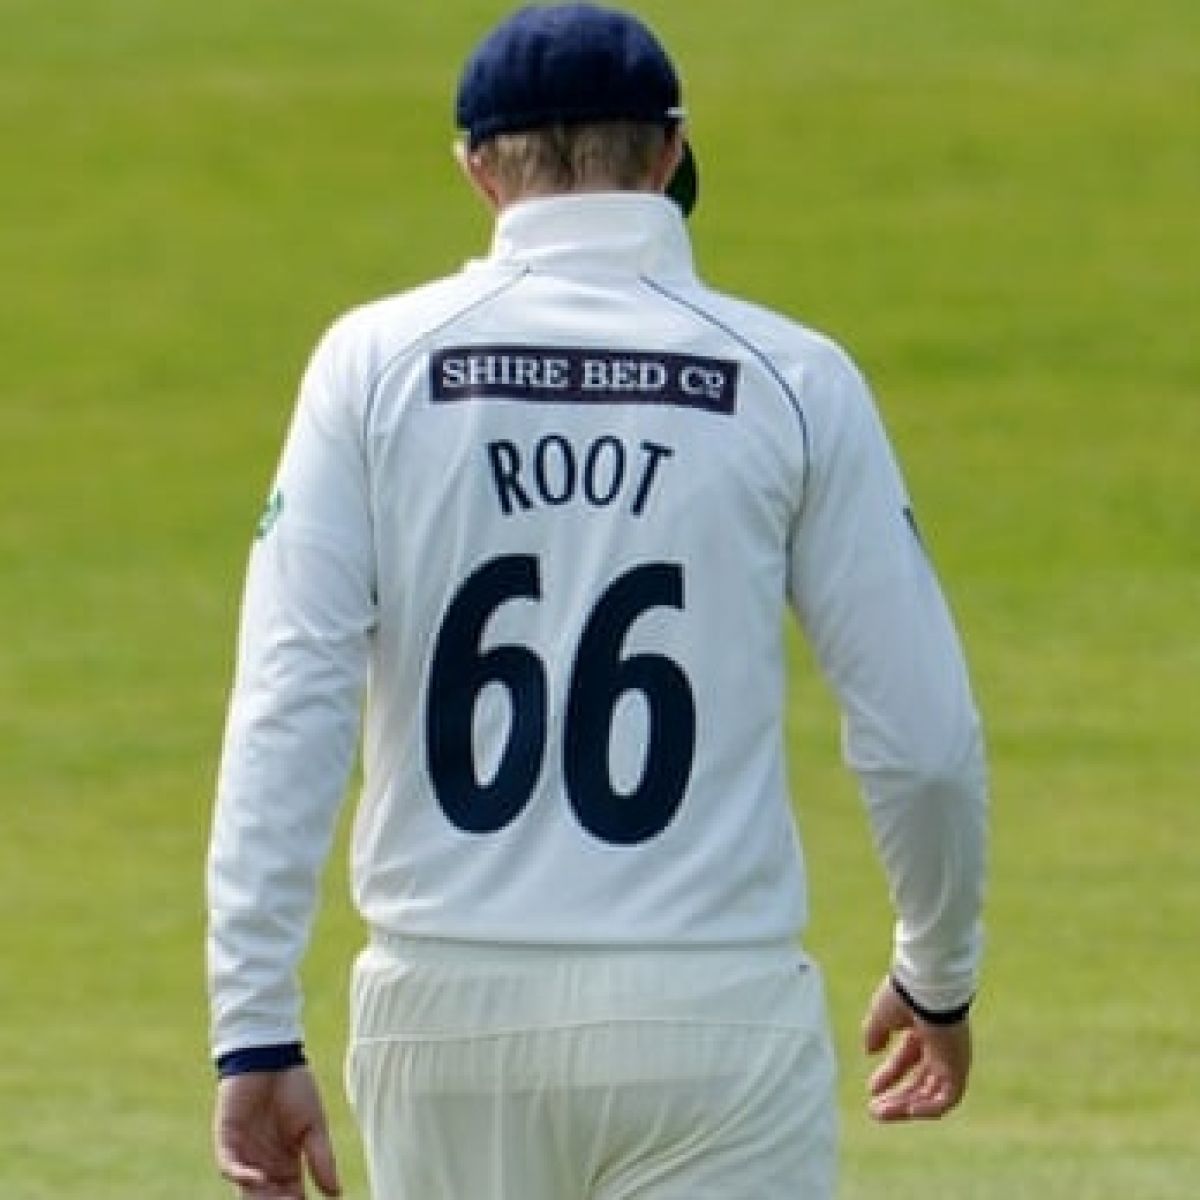 history with shirt numbers for the Ashes